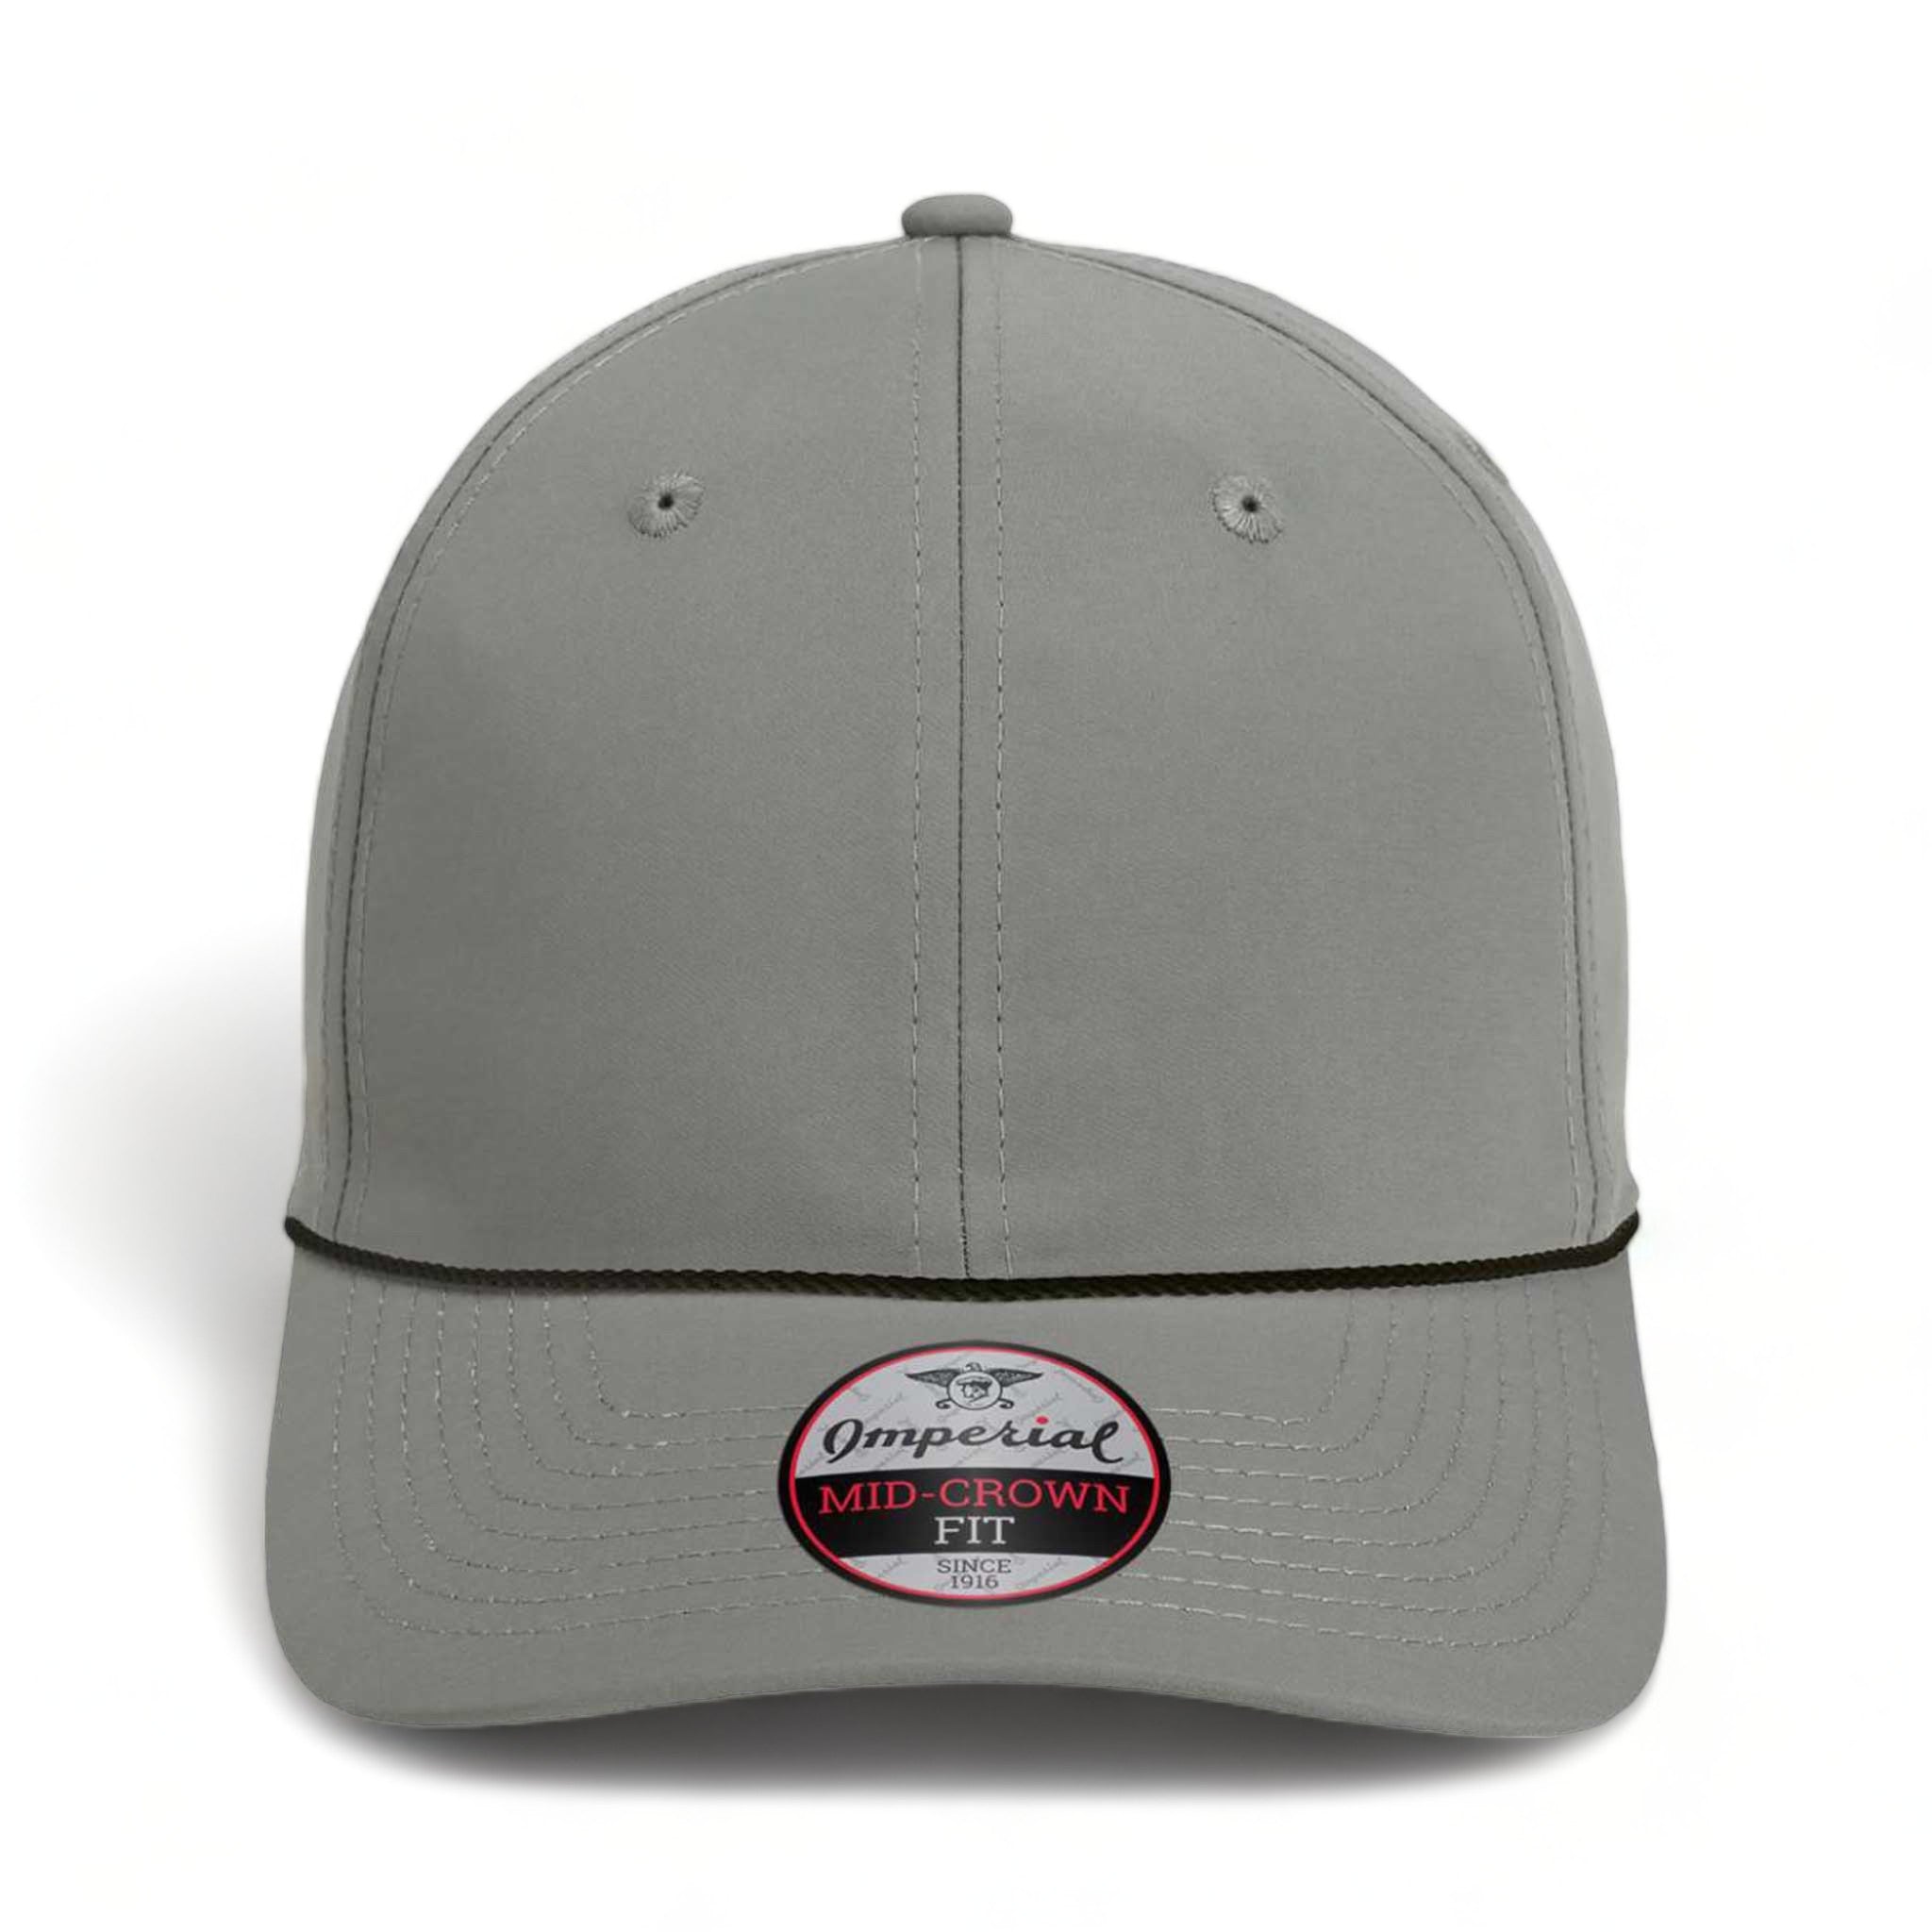 Front view of Imperial 7054 custom hat in grey and black